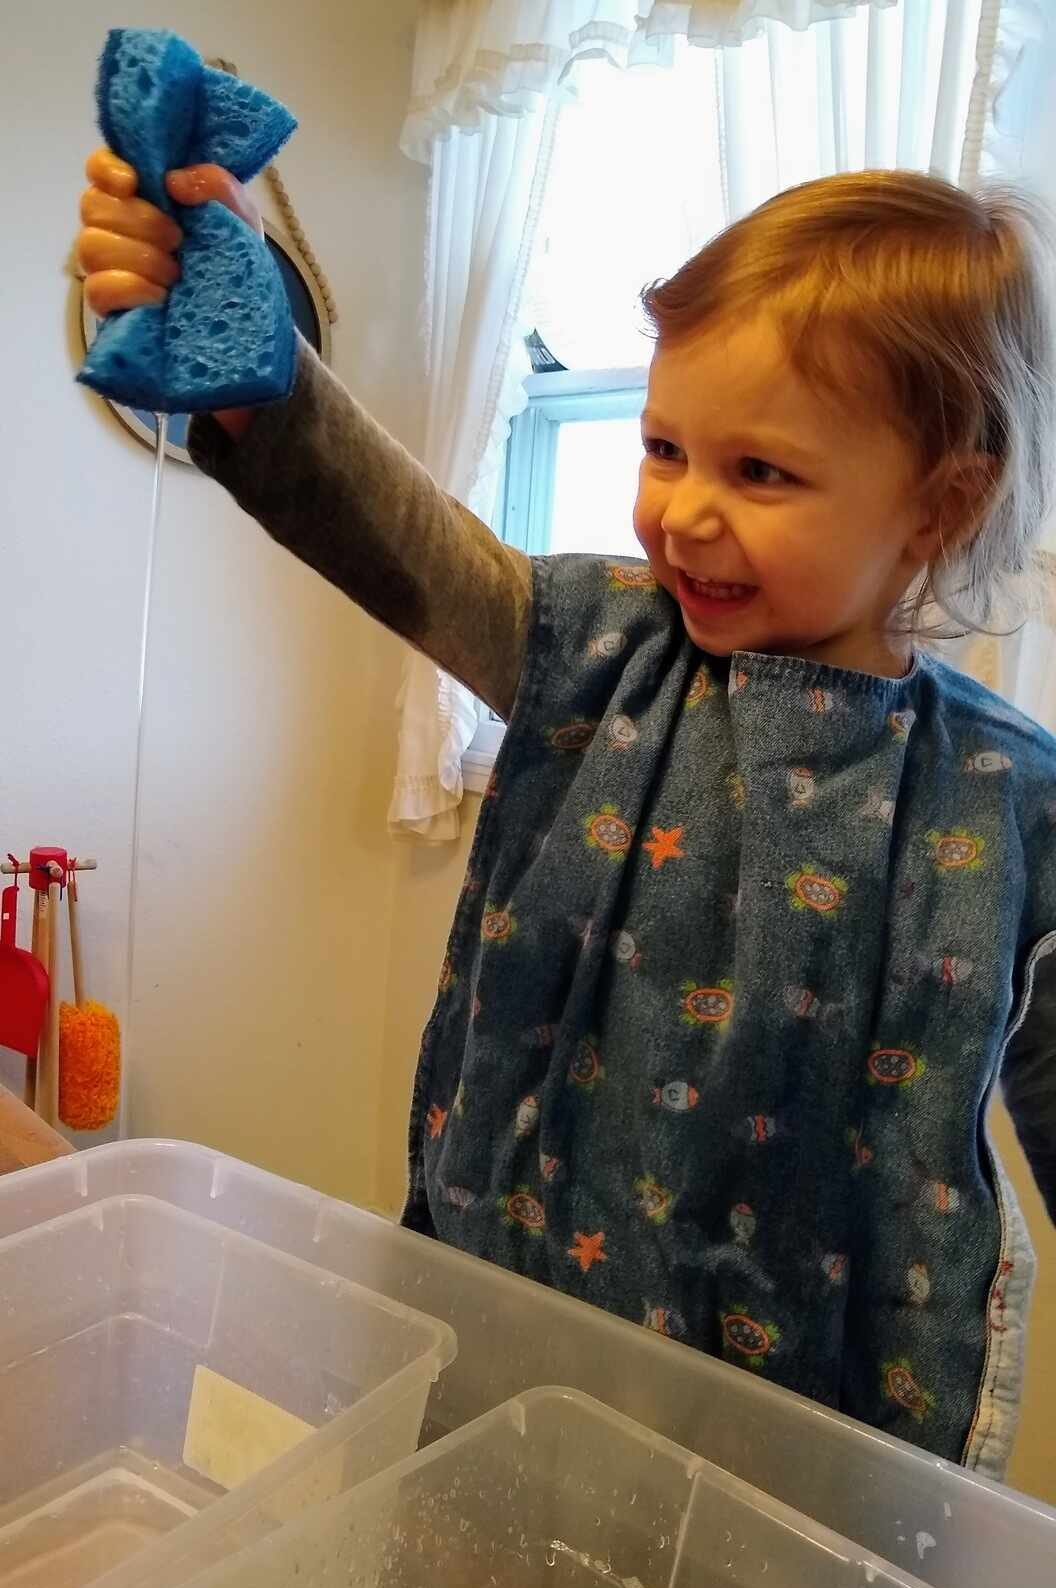 Wringing out sponges is great fine motor play for toddlers and preschoolers to strengthen hand grip muscles by squeezing while enjoying a sensory water transfer activity at home!